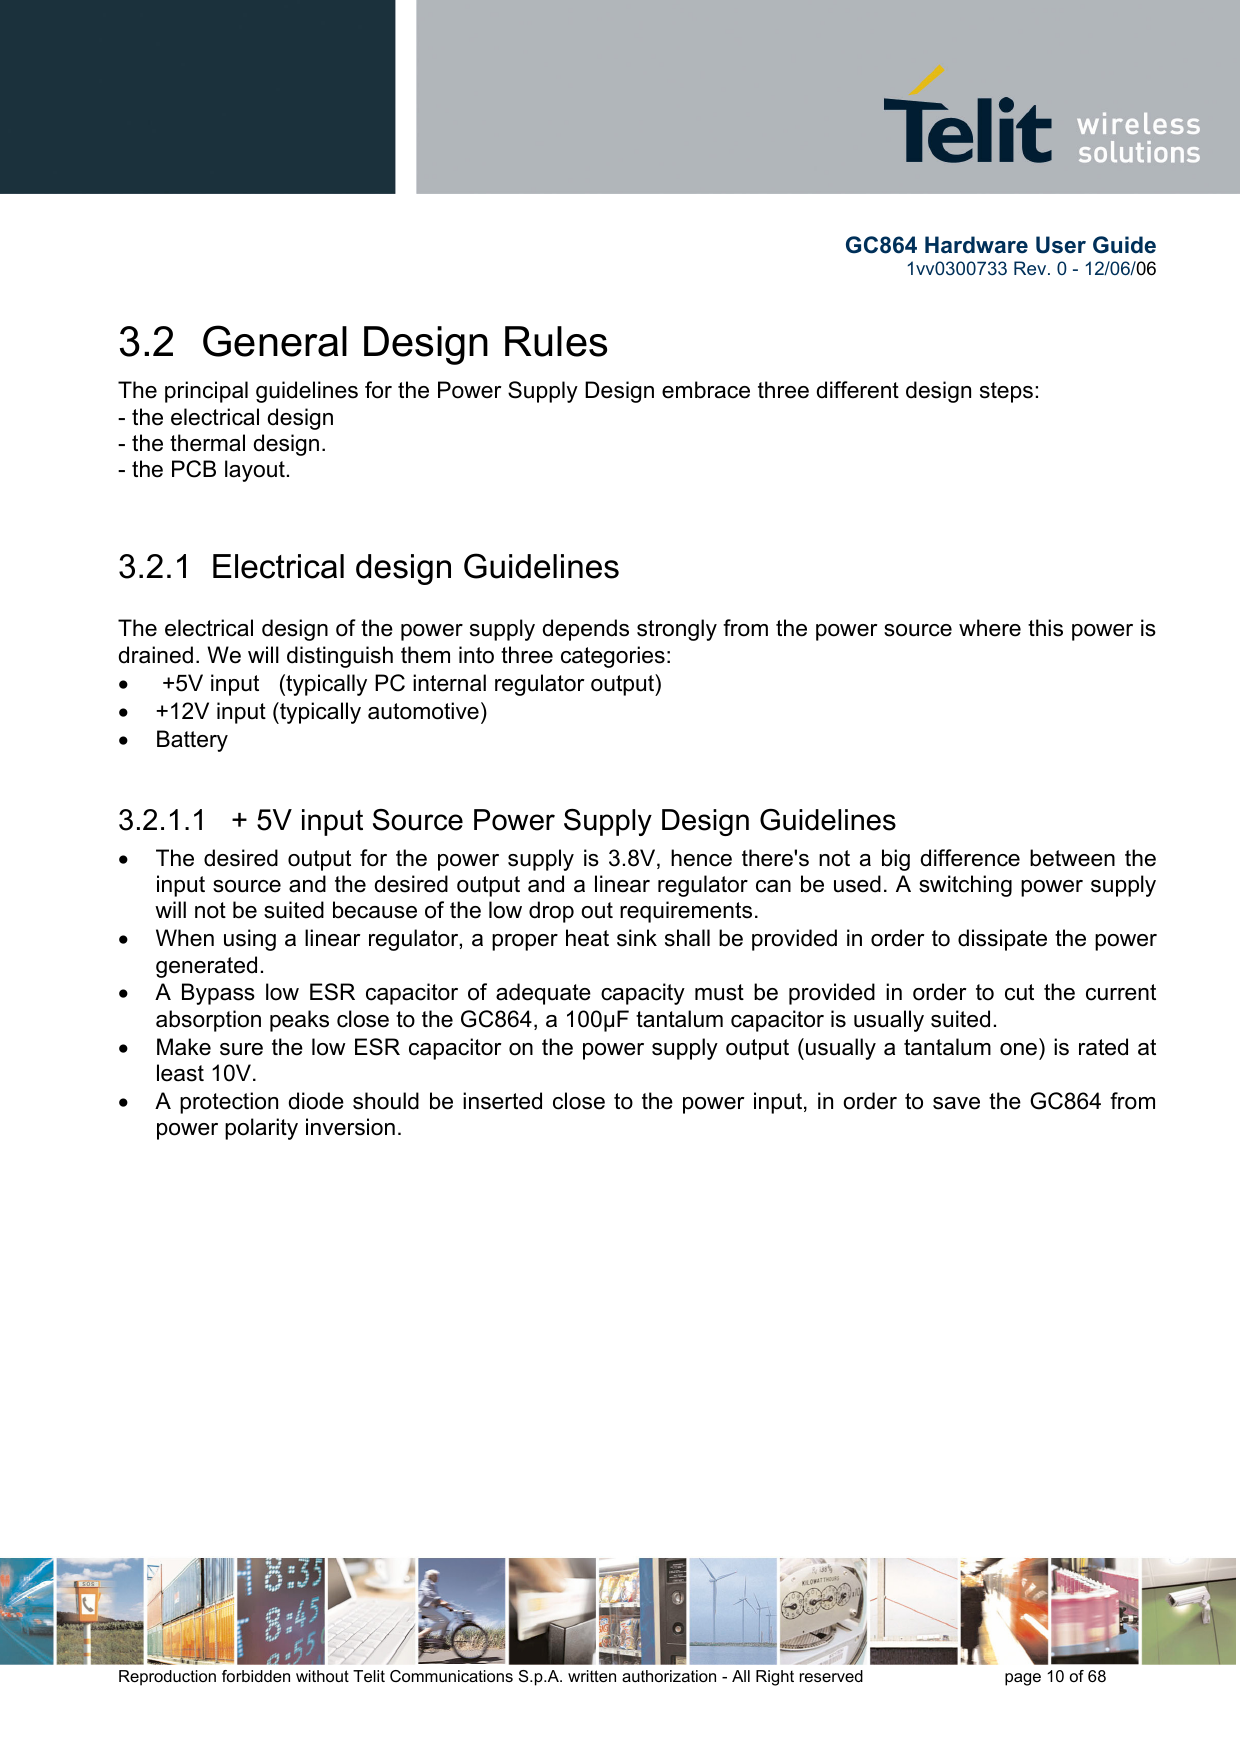        GC864 Hardware User Guide  1vv0300733 Rev. 0 - 12/06/06  Reproduction forbidden without Telit Communications S.p.A. written authorization - All Right reserved    page 10 of 68  3.2  General Design Rules The principal guidelines for the Power Supply Design embrace three different design steps: - the electrical design - the thermal design. - the PCB layout.  3.2.1  Electrical design Guidelines  The electrical design of the power supply depends strongly from the power source where this power is drained. We will distinguish them into three categories: •   +5V input   (typically PC internal regulator output) •  +12V input (typically automotive) •  Battery  3.2.1.1   + 5V input Source Power Supply Design Guidelines •  The desired output for the power supply is 3.8V, hence there&apos;s not a big difference between the input source and the desired output and a linear regulator can be used. A switching power supply will not be suited because of the low drop out requirements. •  When using a linear regulator, a proper heat sink shall be provided in order to dissipate the power generated. •  A Bypass low ESR capacitor of adequate capacity must be provided in order to cut the current absorption peaks close to the GC864, a 100μF tantalum capacitor is usually suited. •  Make sure the low ESR capacitor on the power supply output (usually a tantalum one) is rated at least 10V. •  A protection diode should be inserted close to the power input, in order to save the GC864 from power polarity inversion. 